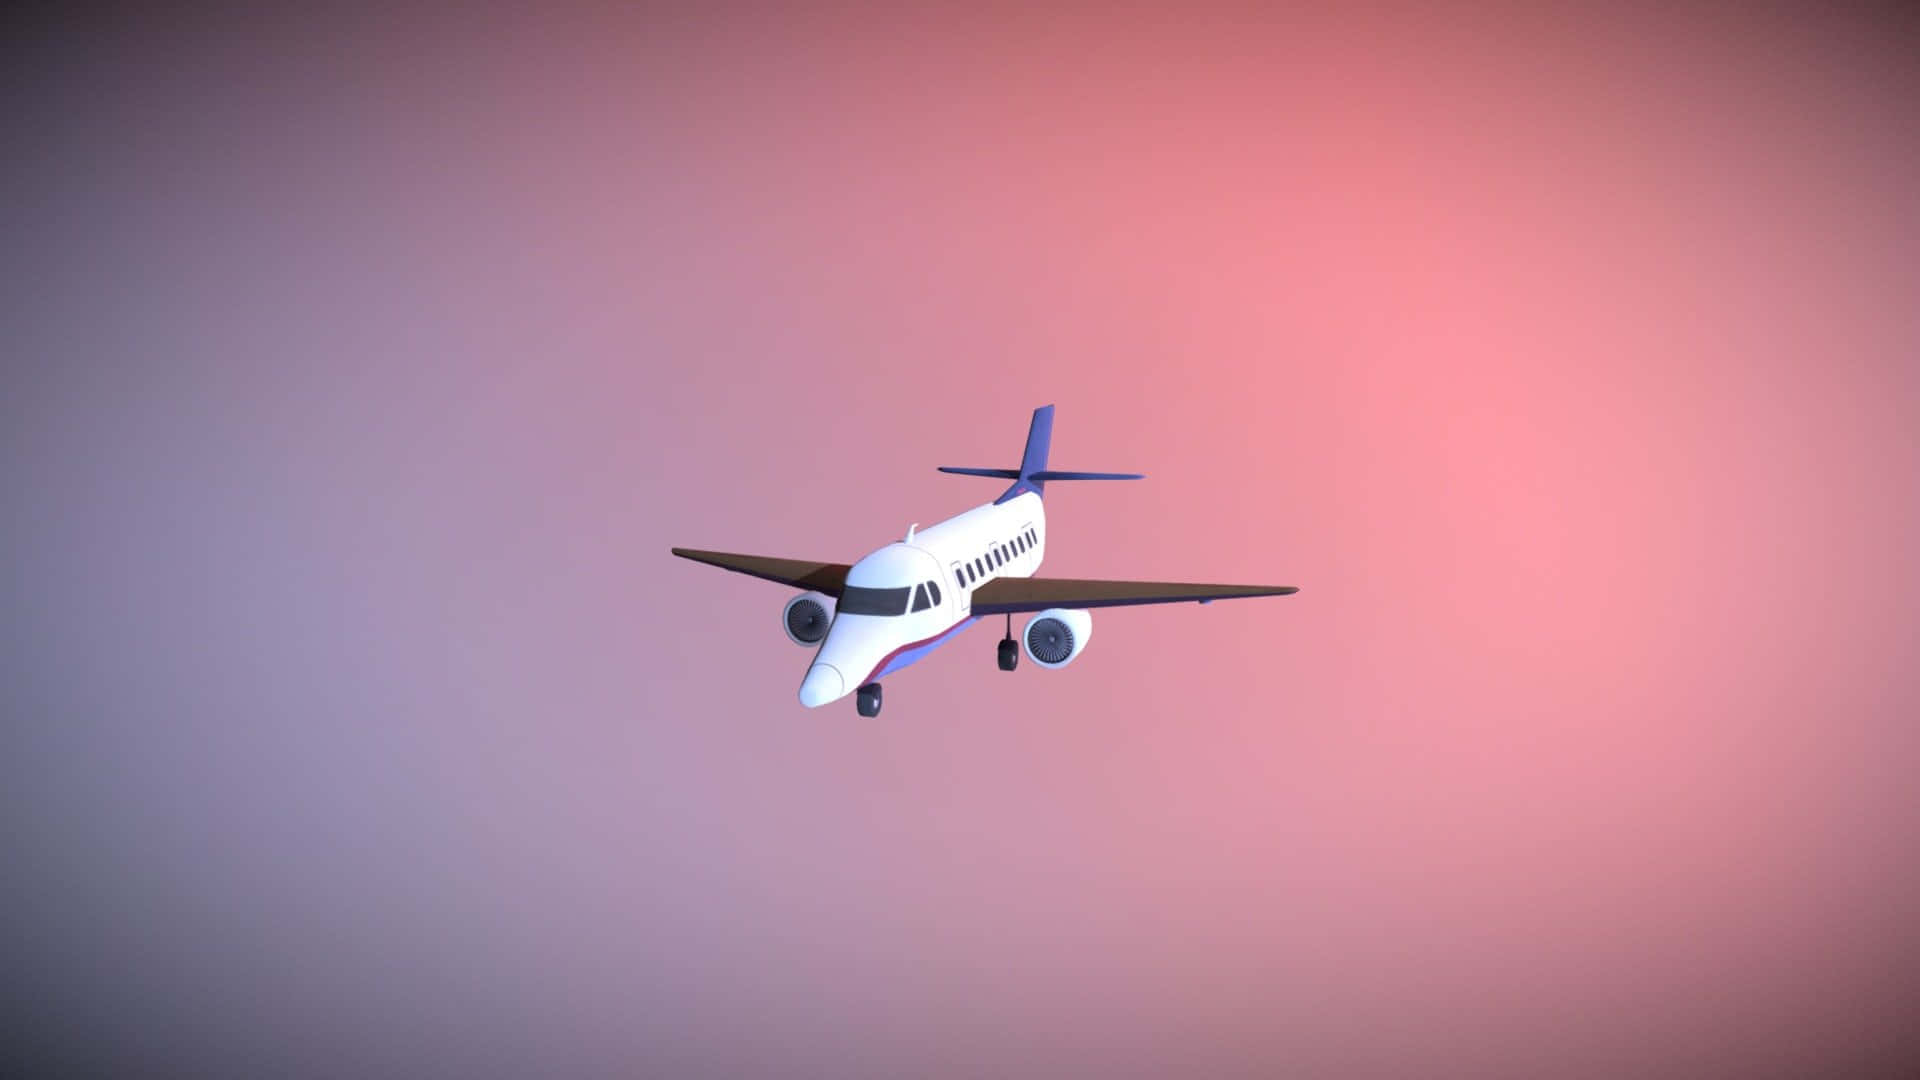 Brighten Up Your Next Flight - Fly in a Pink Plane Wallpaper